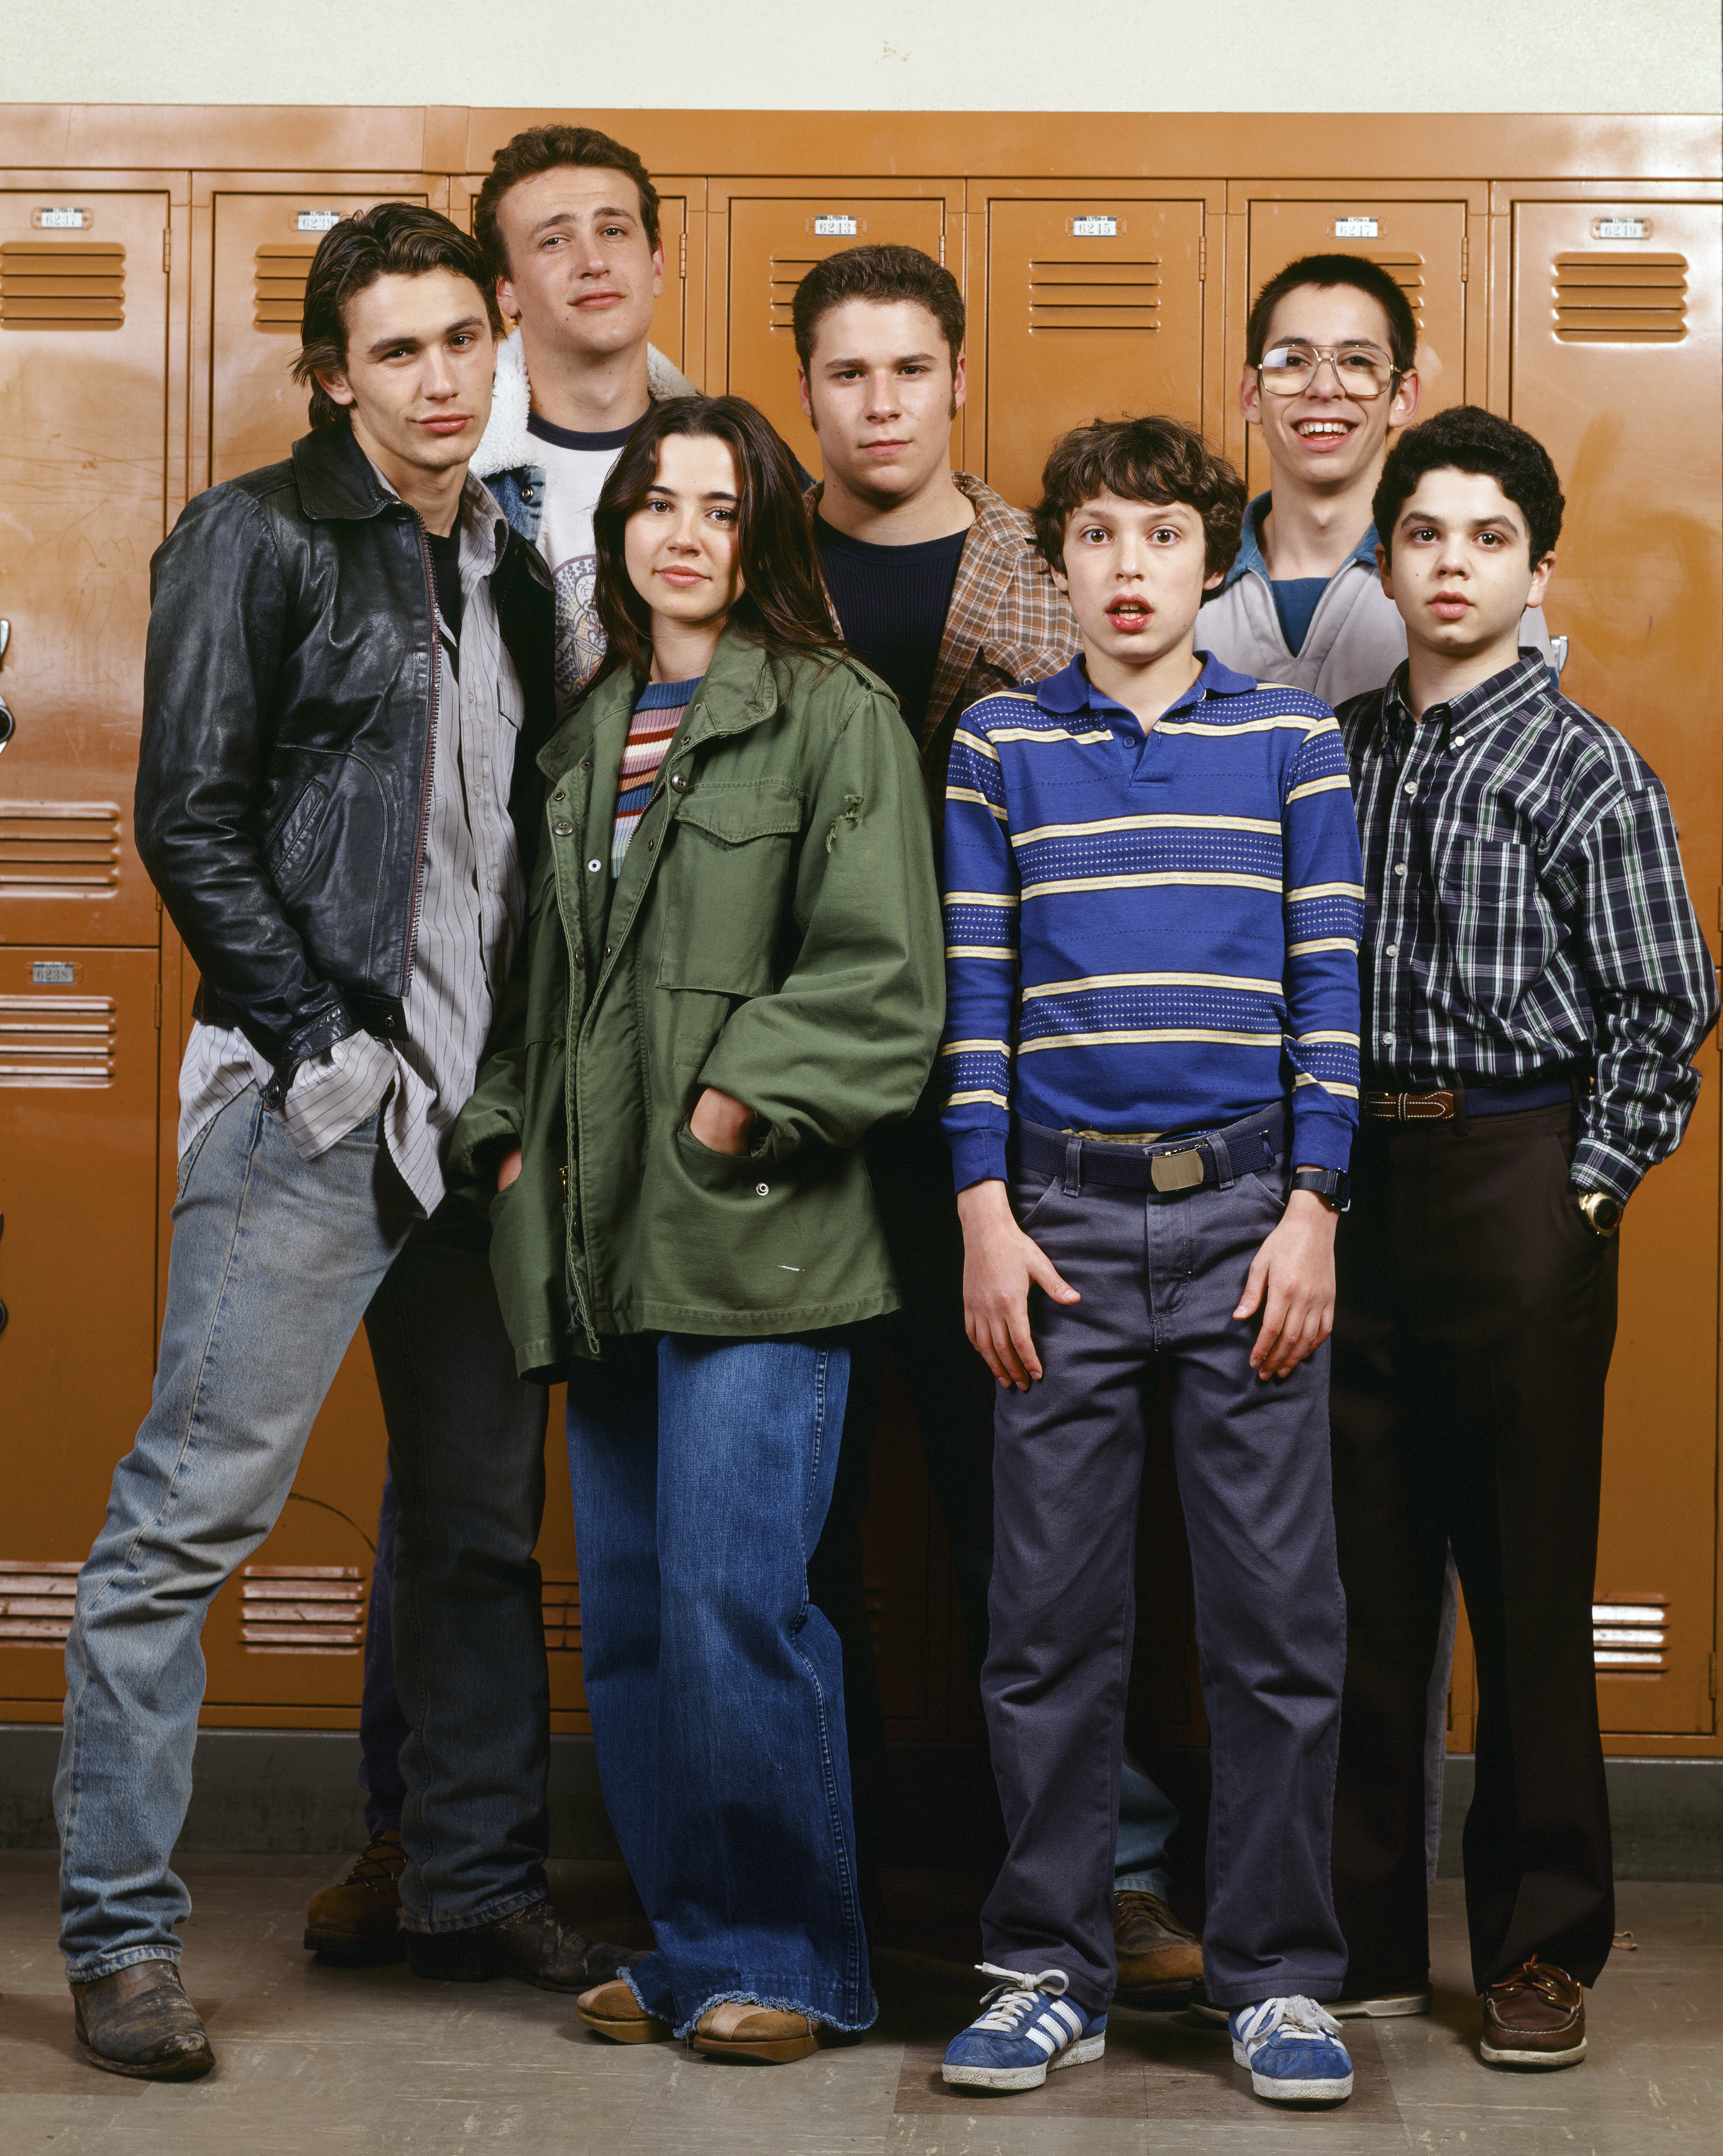 The cast of 'Freaks and Geeks' on Aug. 5, 1999.